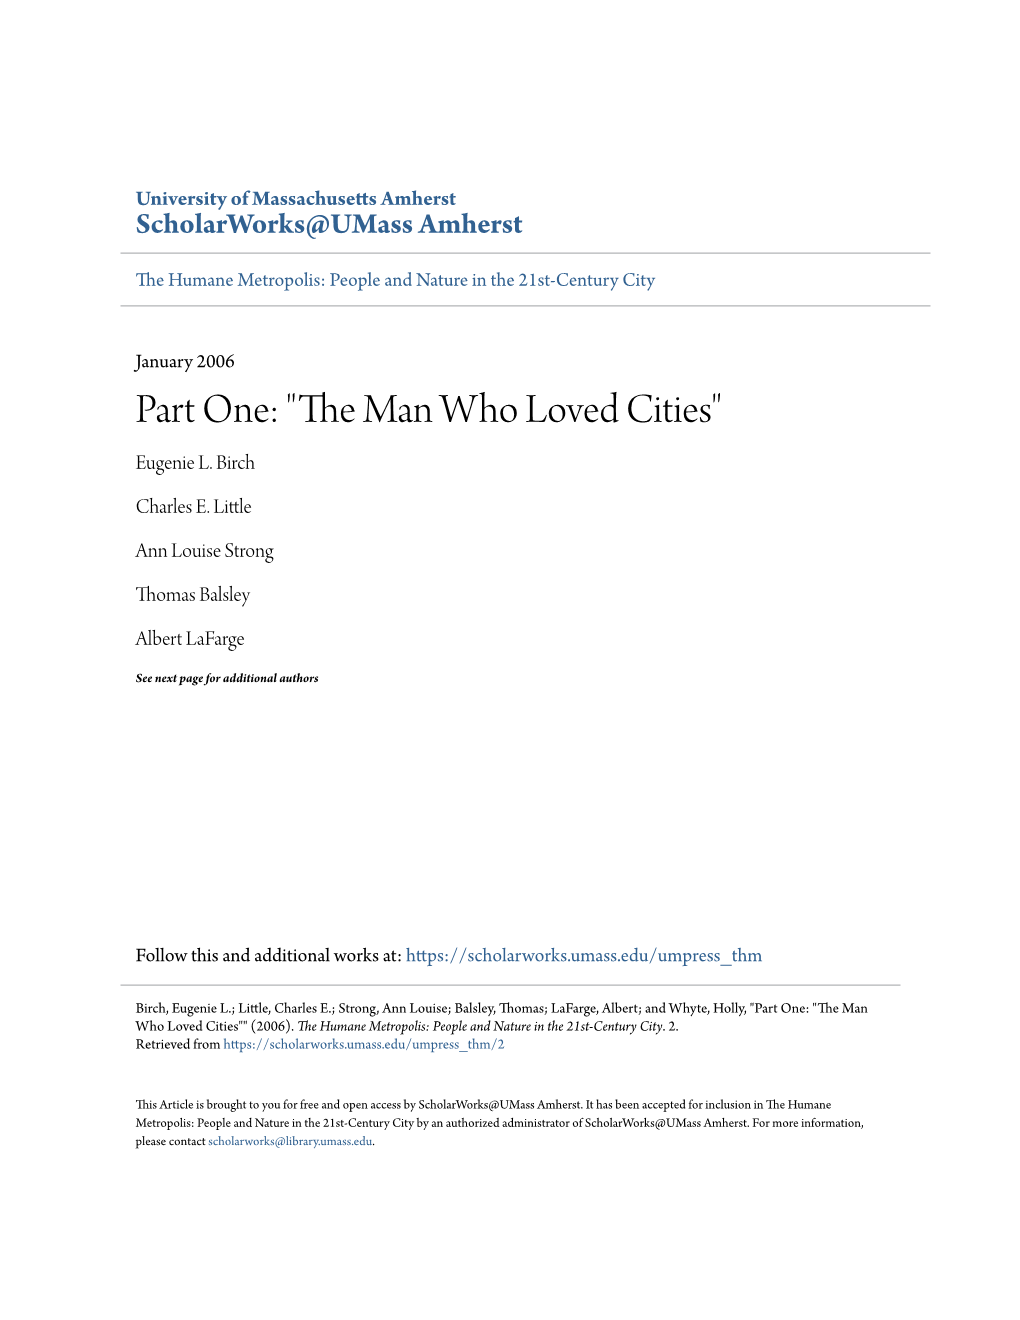 The Man Who Loved Cities” This Page Intentionally Left Blank Among Many Tributes Paid to William H